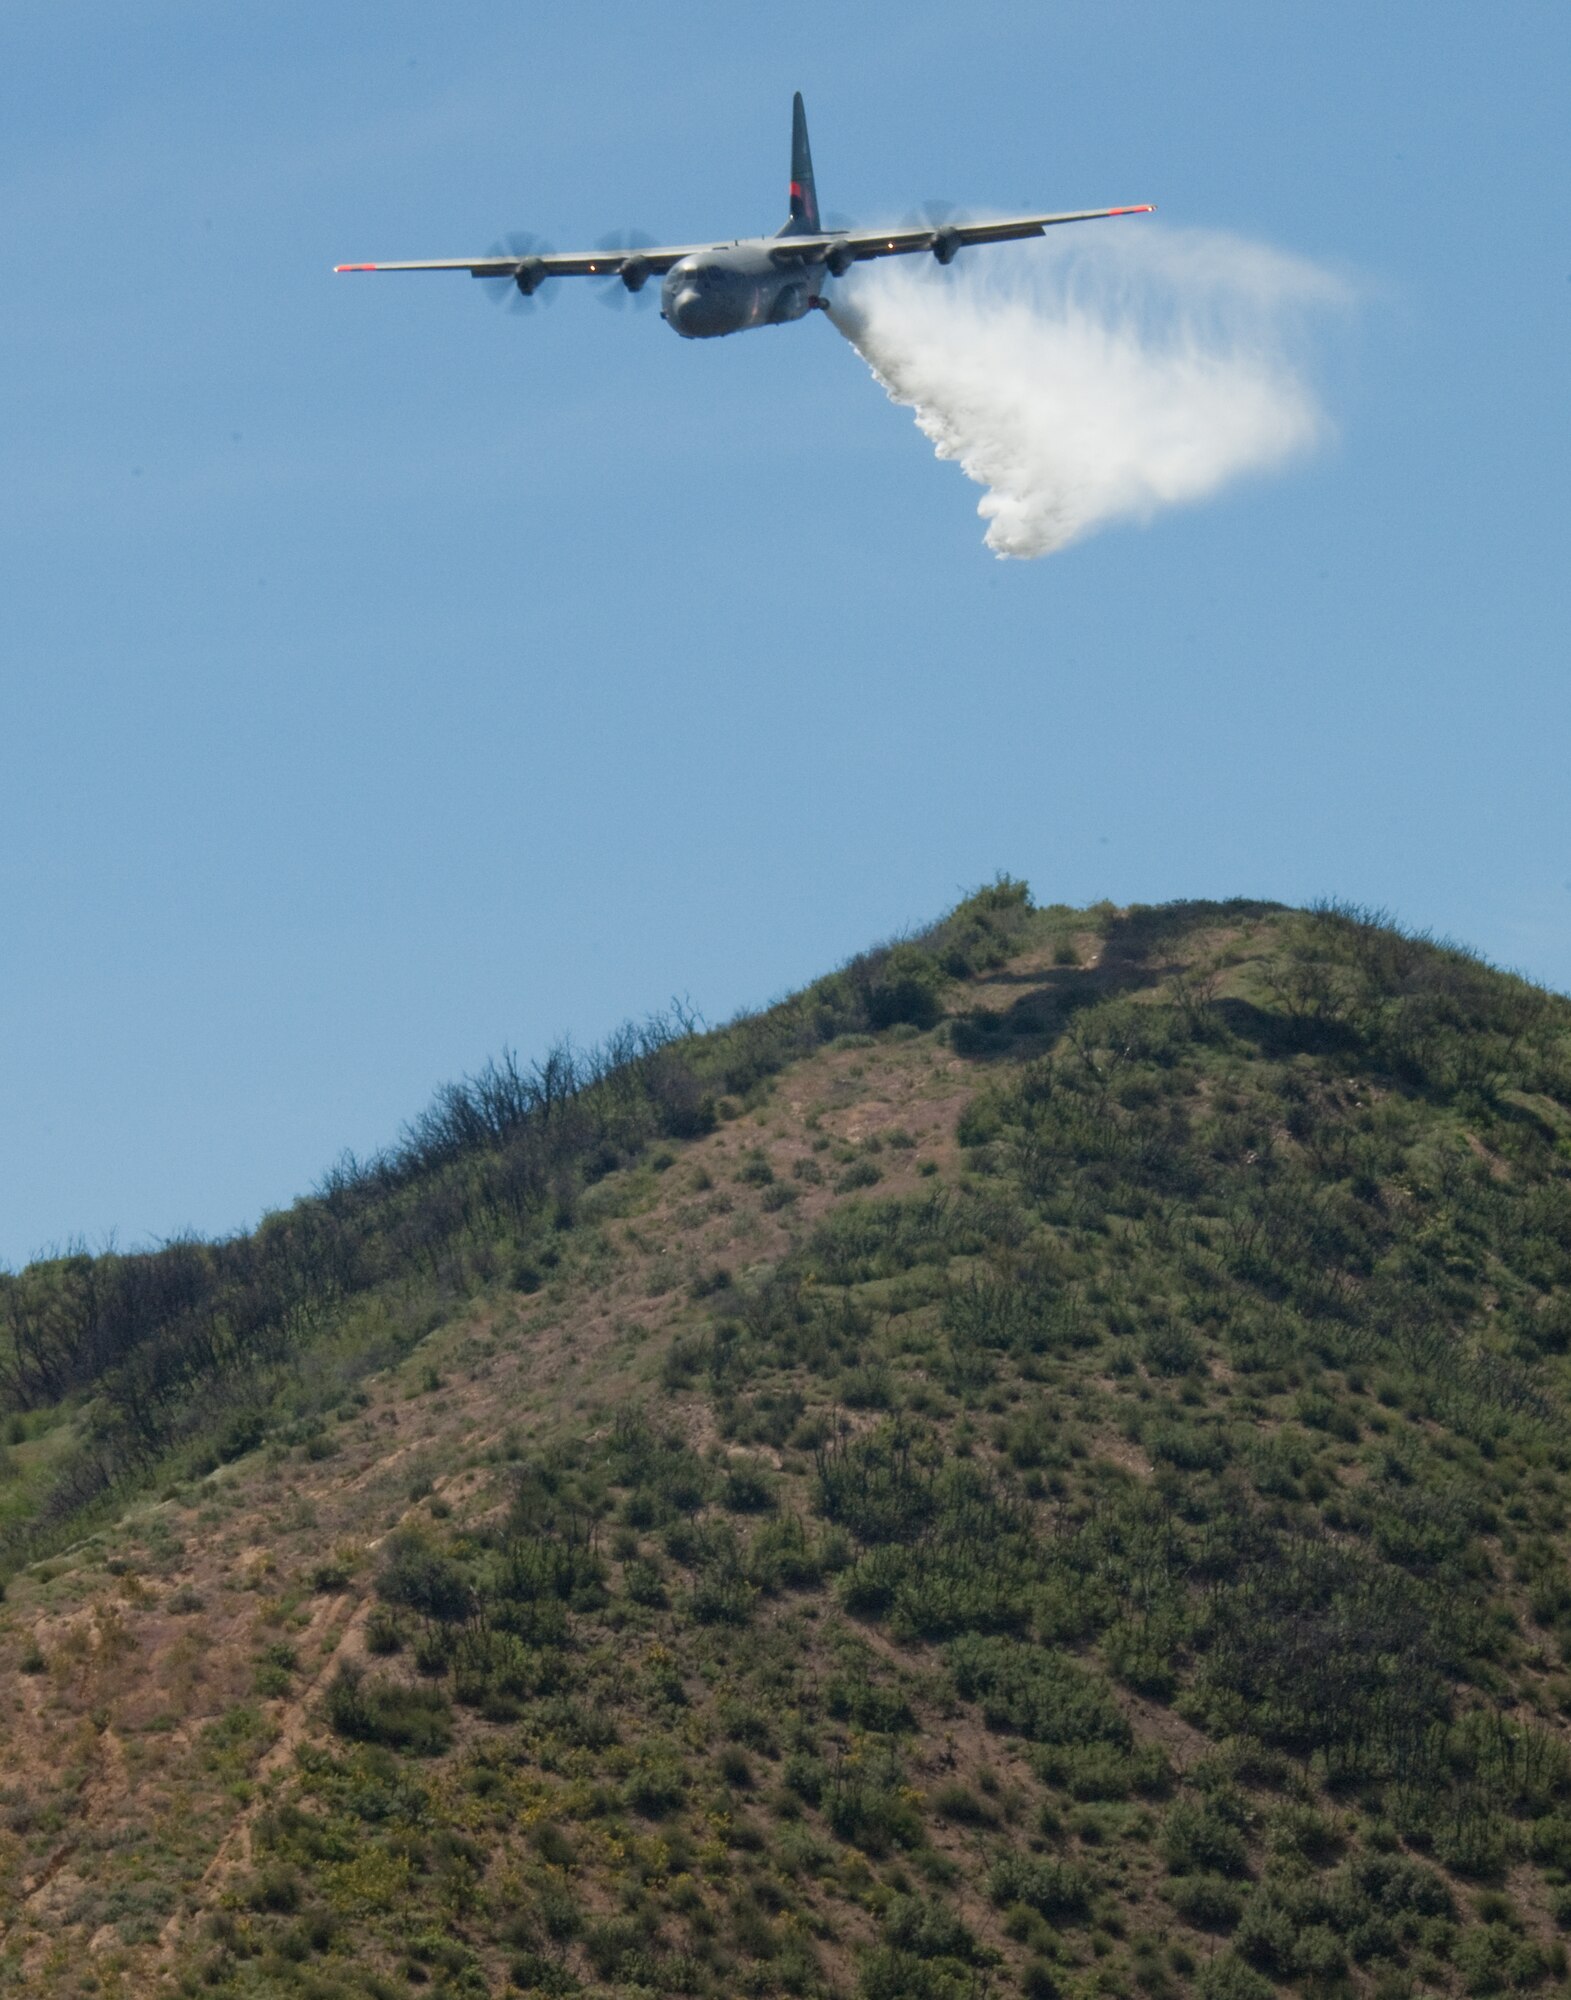 A line of water is dropped high above the Los Angeles Forest from a Air National Guard C-130 containing the MAFFS (Modular Airborne Firefighting System) system used to combat wildfires, during annual MAFFS training at the 146th Airlift Wing in Port Hueneme, California on May 3 2016. (U.S. Air National Guard photo by Staff Sgt. Nicholas Carzis) 